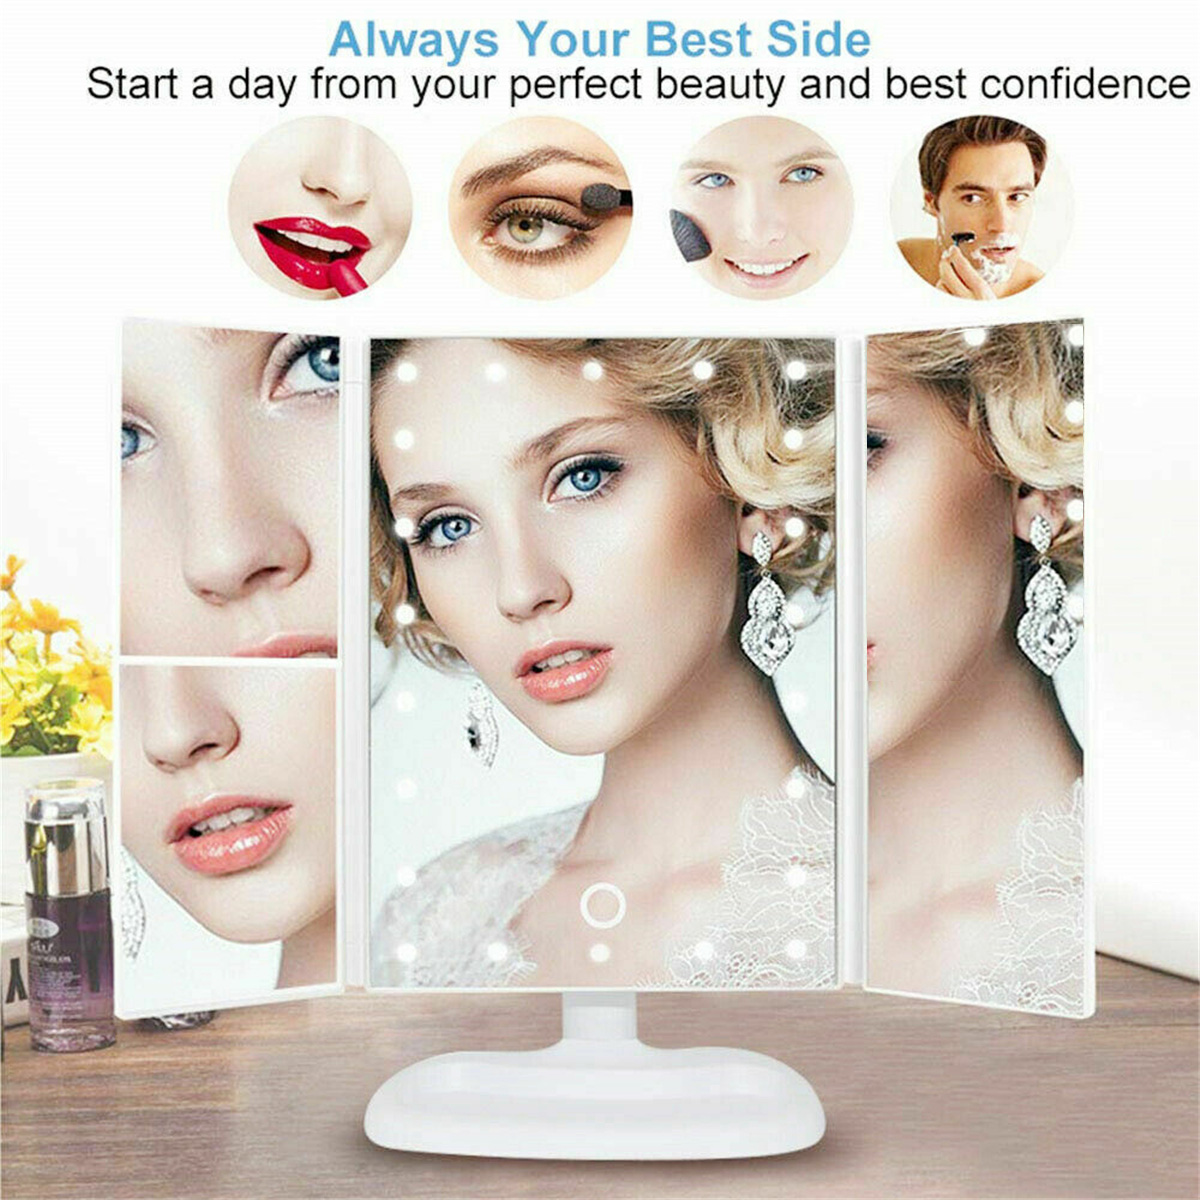 22LED-Tri-Fold-Touch-Screen-Makeup-Mirror-Table-Cosmetic-Vanity-Light-Mirror-1943281-5